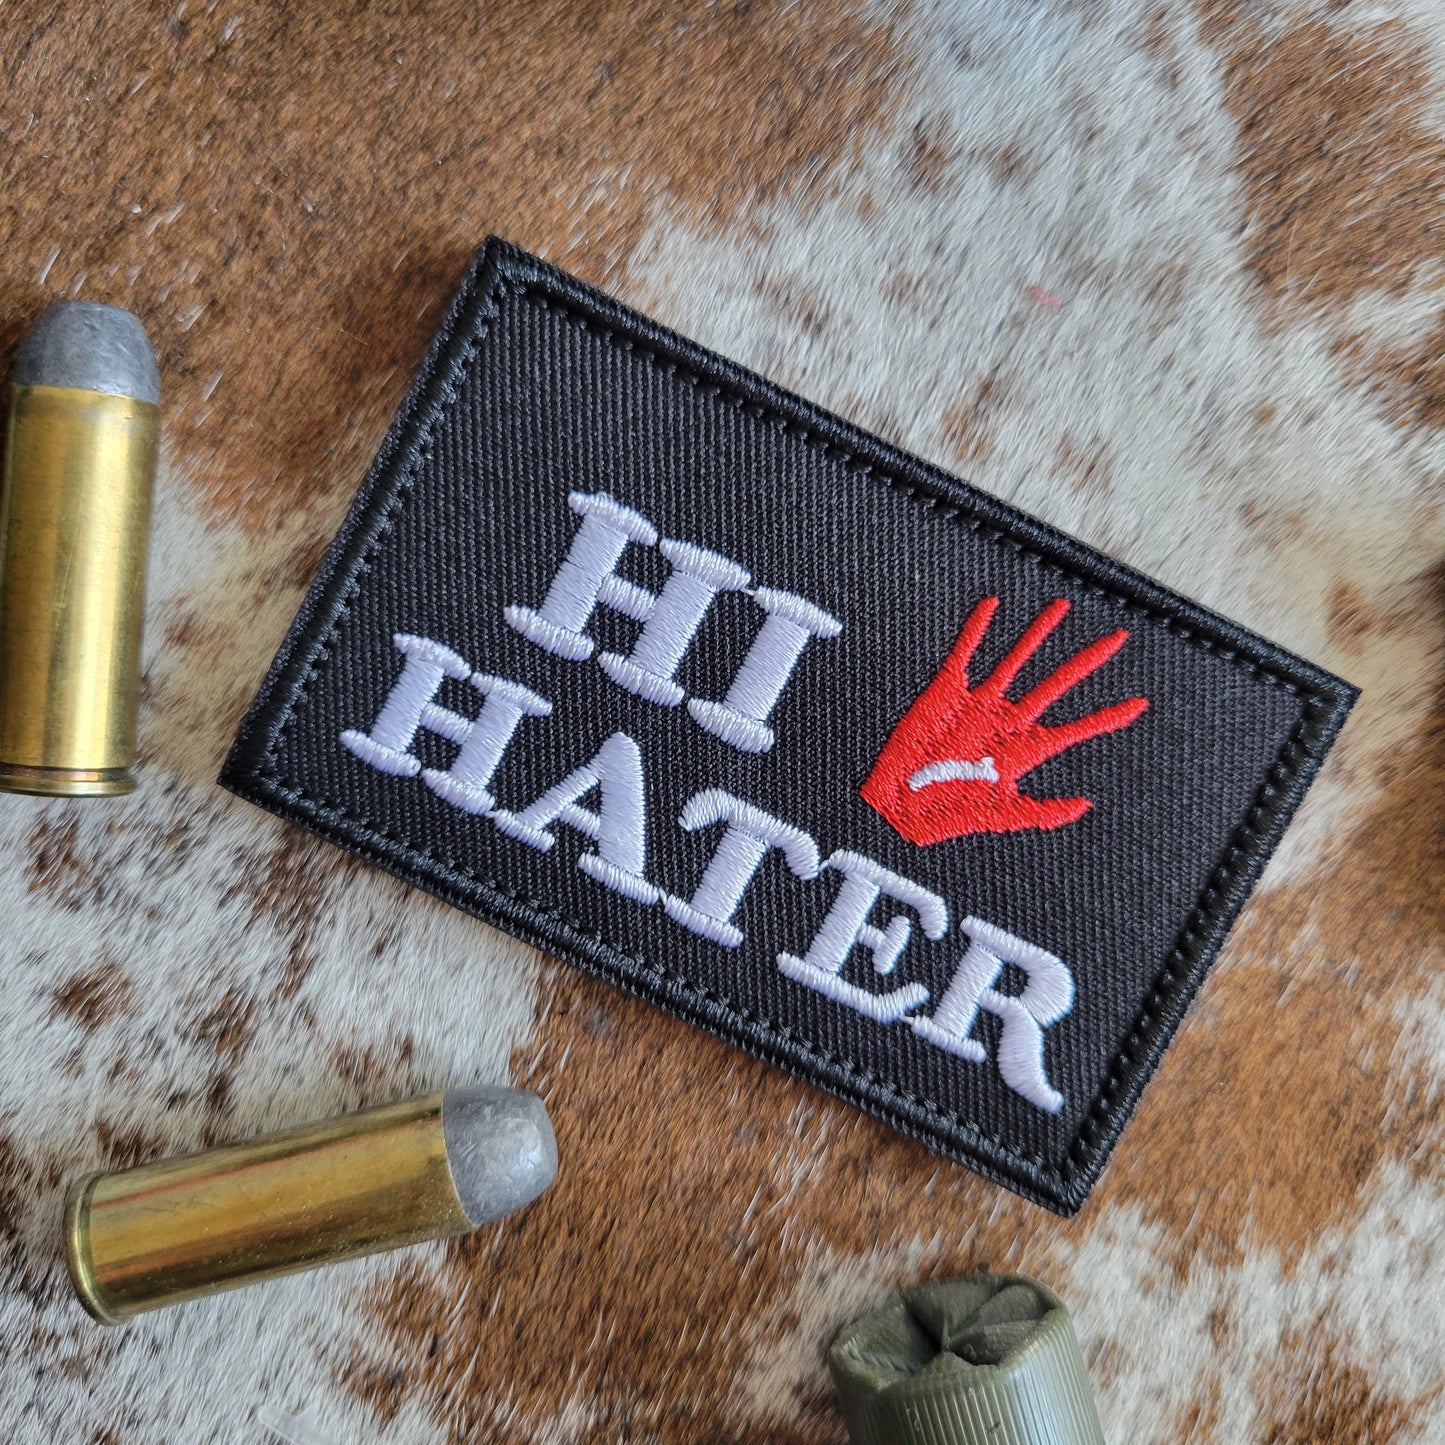 Hater Patch